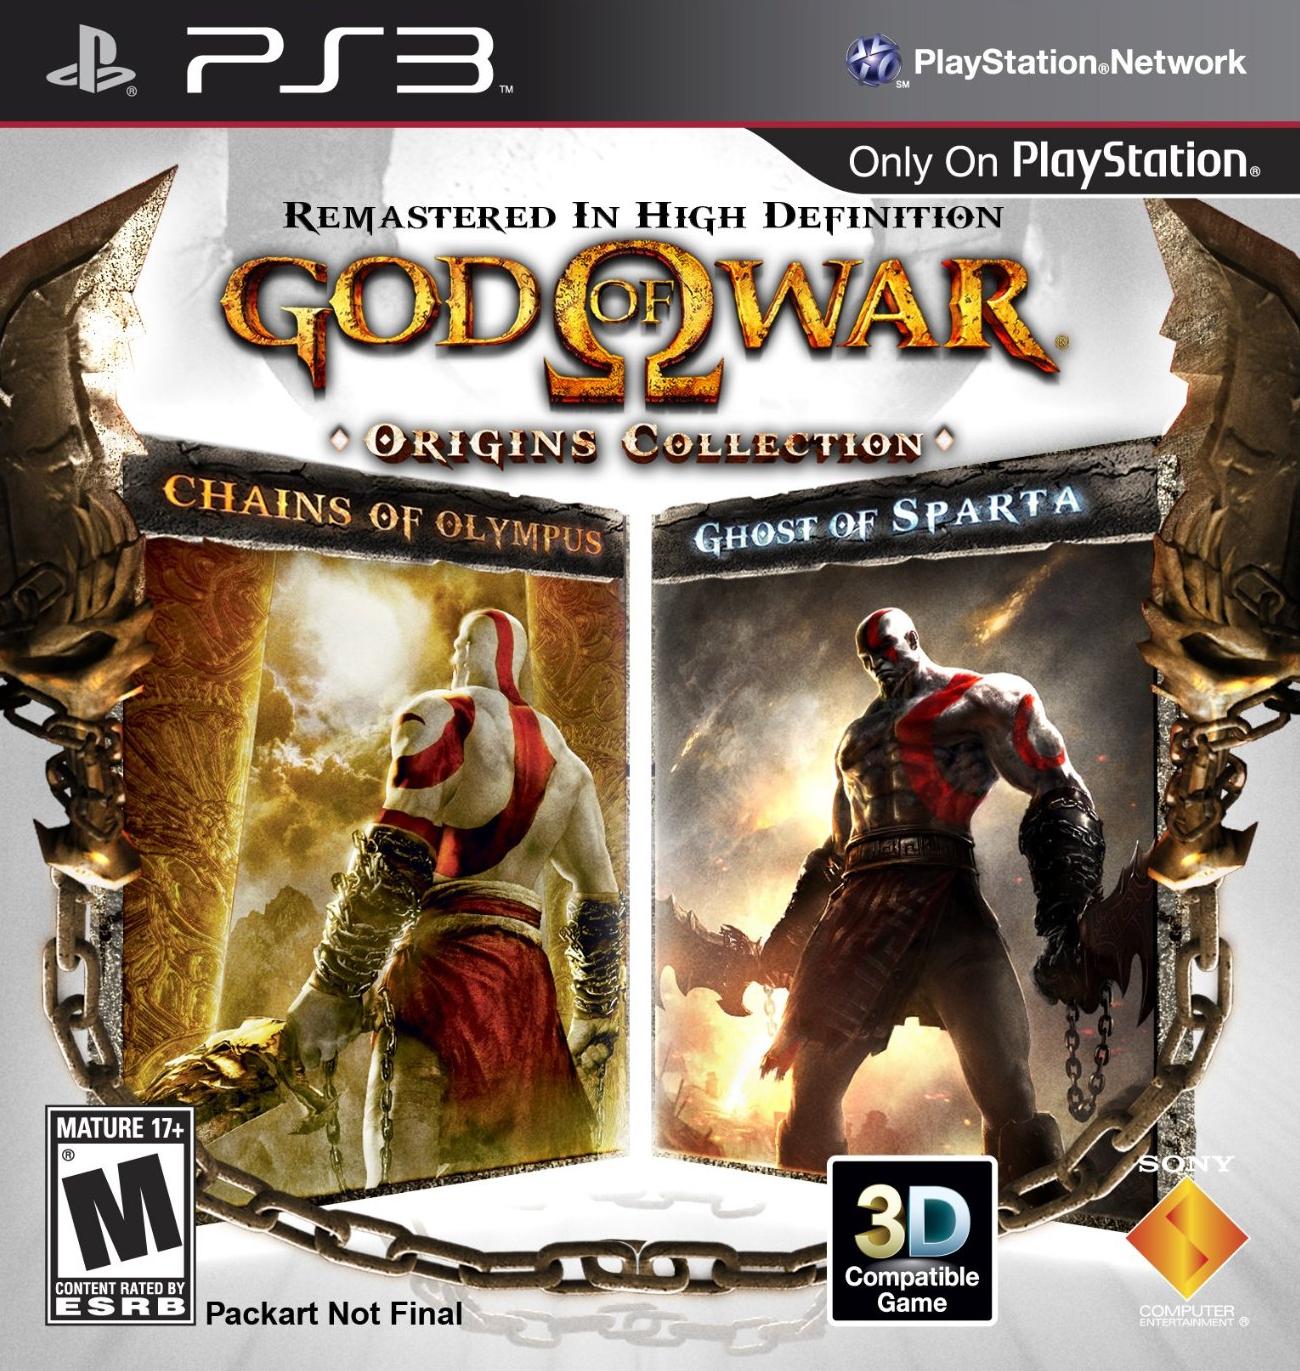 God of War Origins Collection, Sony, PlayStation 3, 711719828921 - image 1 of 7